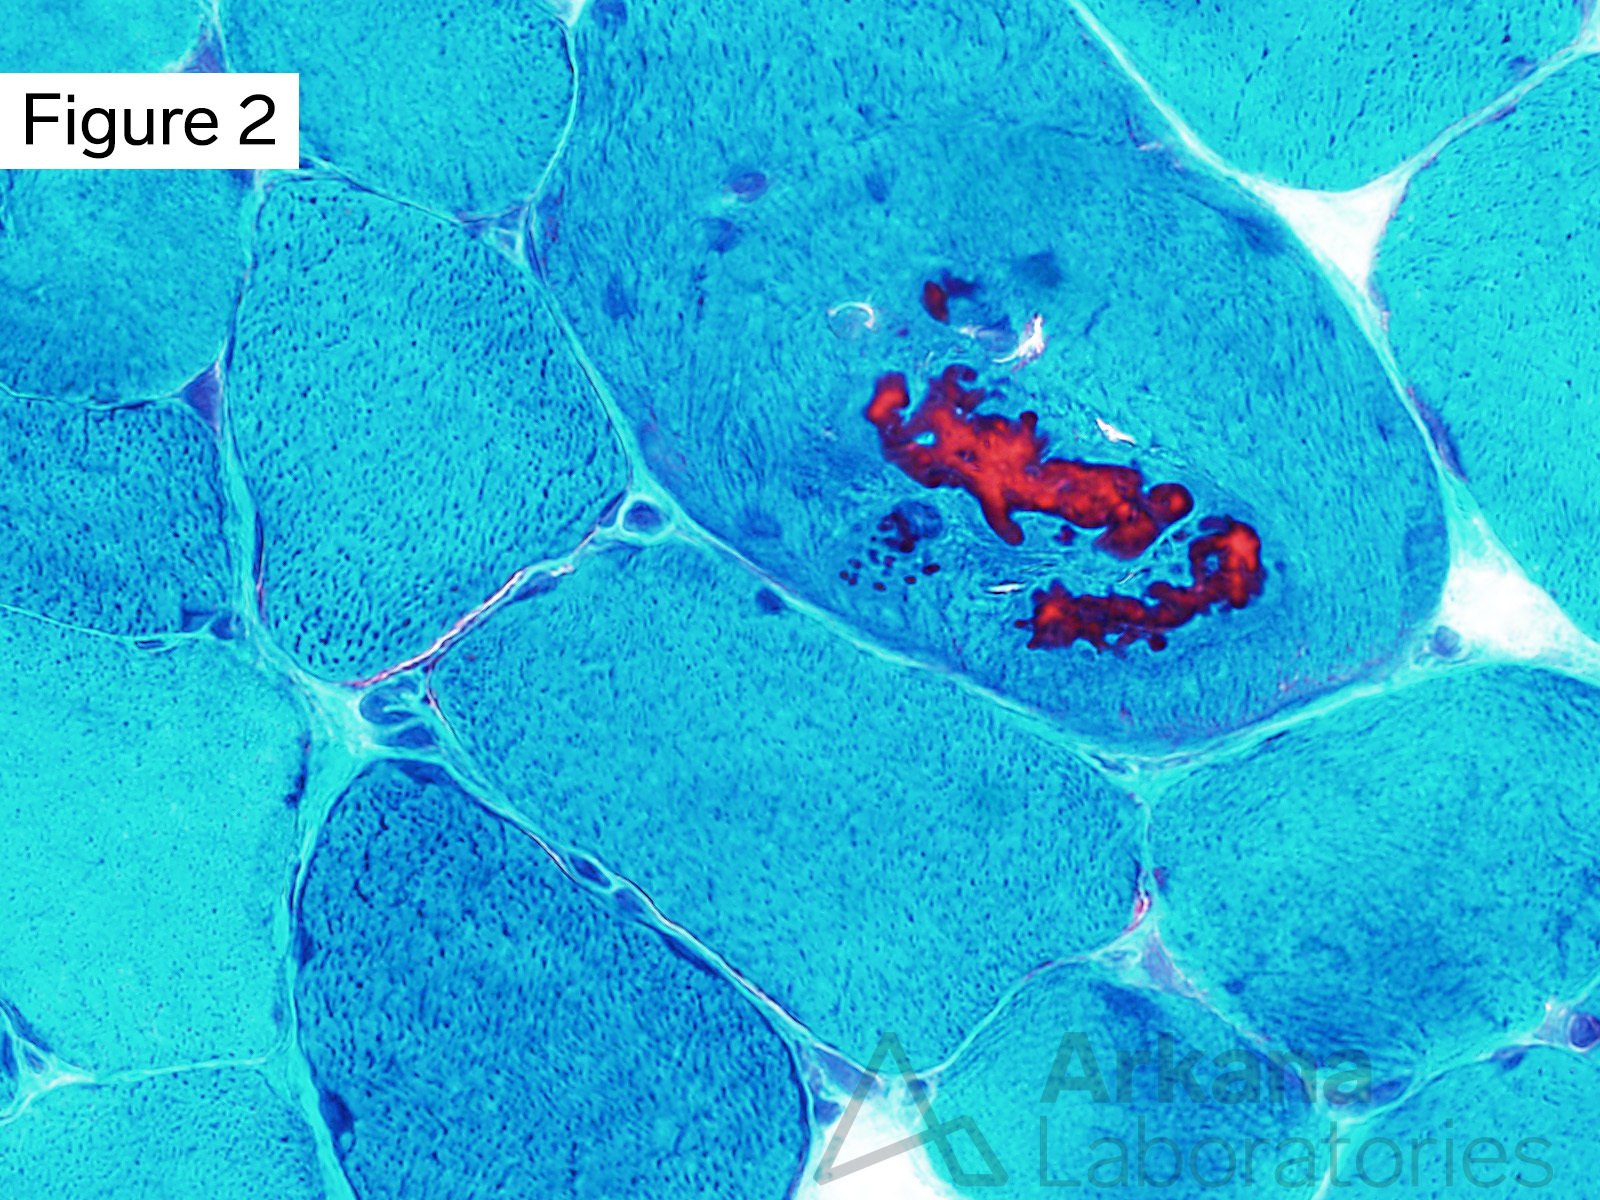 Toxic Myopathy Due to Ingestion of Palytoxin, High magnification image showing a necrotic muscle fiber with an area of sarcomeric (myofibrillar) disorganization